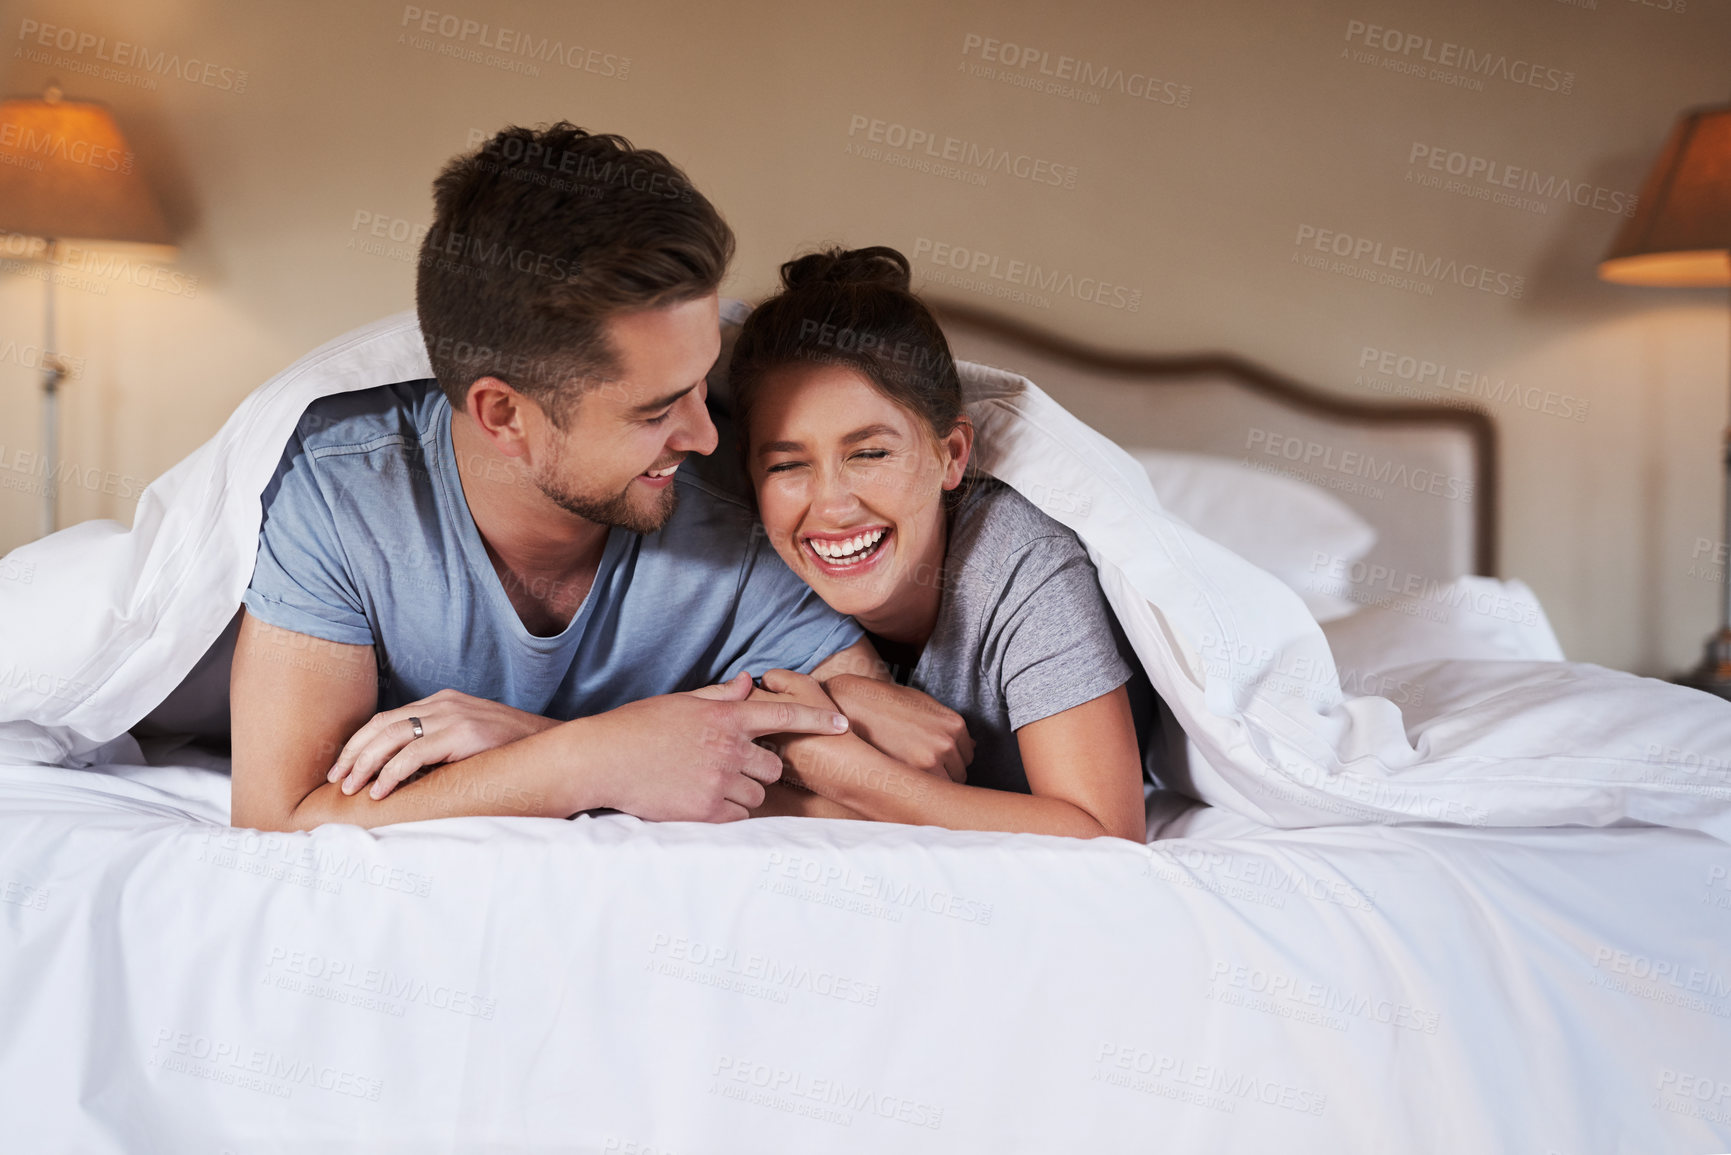 Buy stock photo Shot of an affectionate young couple spending some quality time together in their bedroom at home